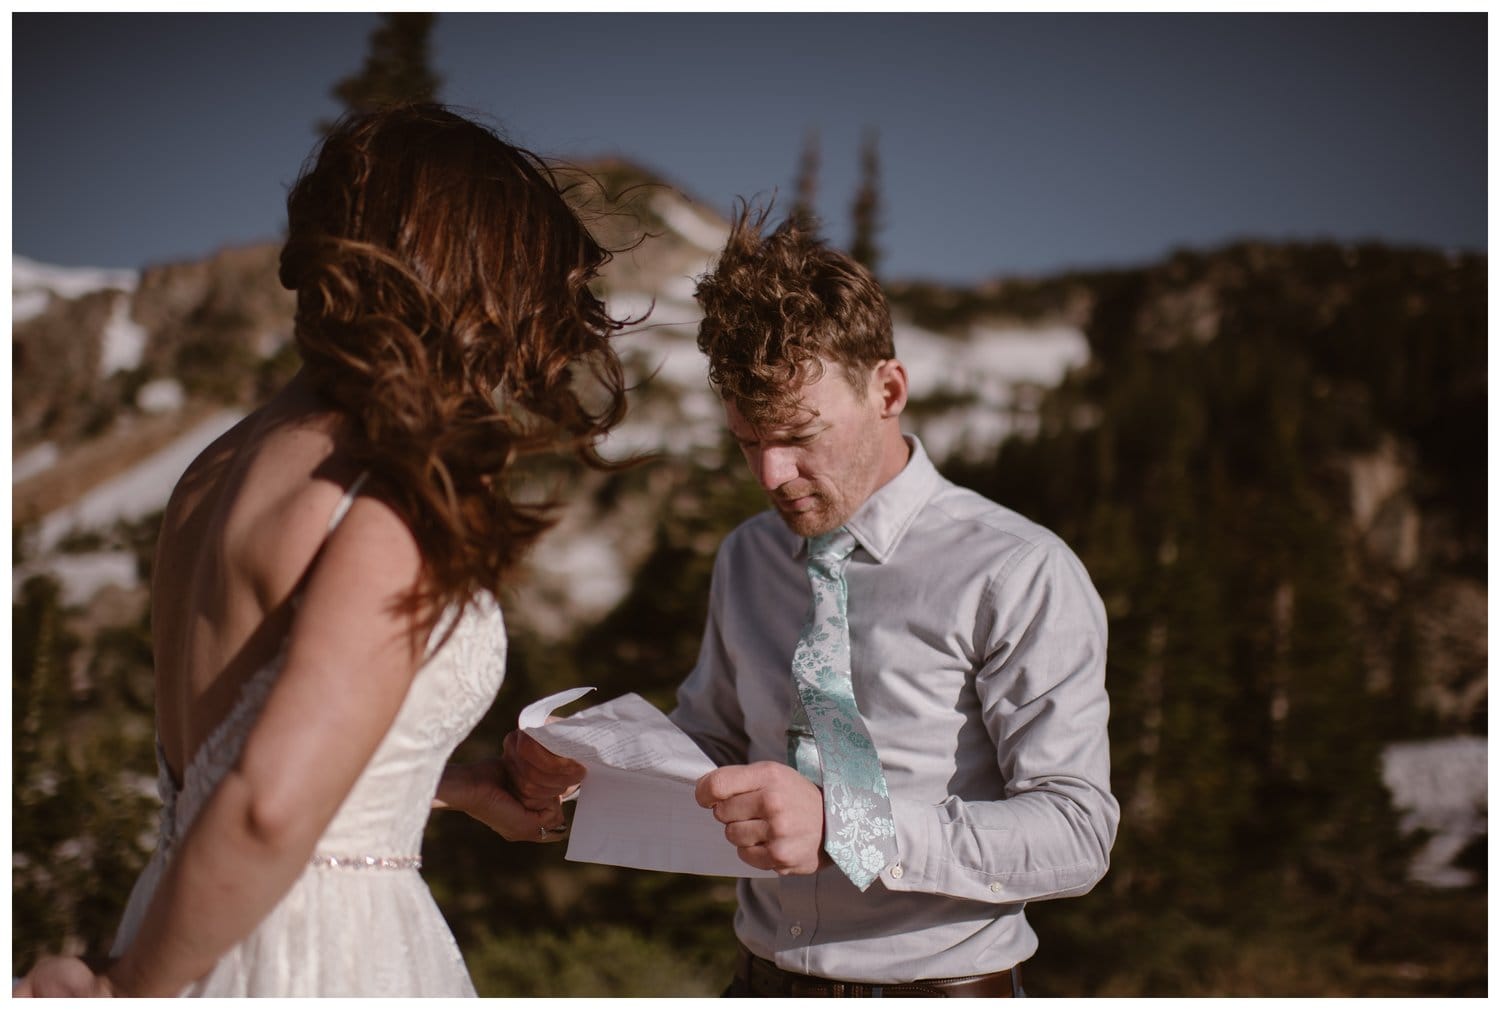 Groom reads his vows during intimate elopement ceremony at the Indian Peaks in Colorado. 